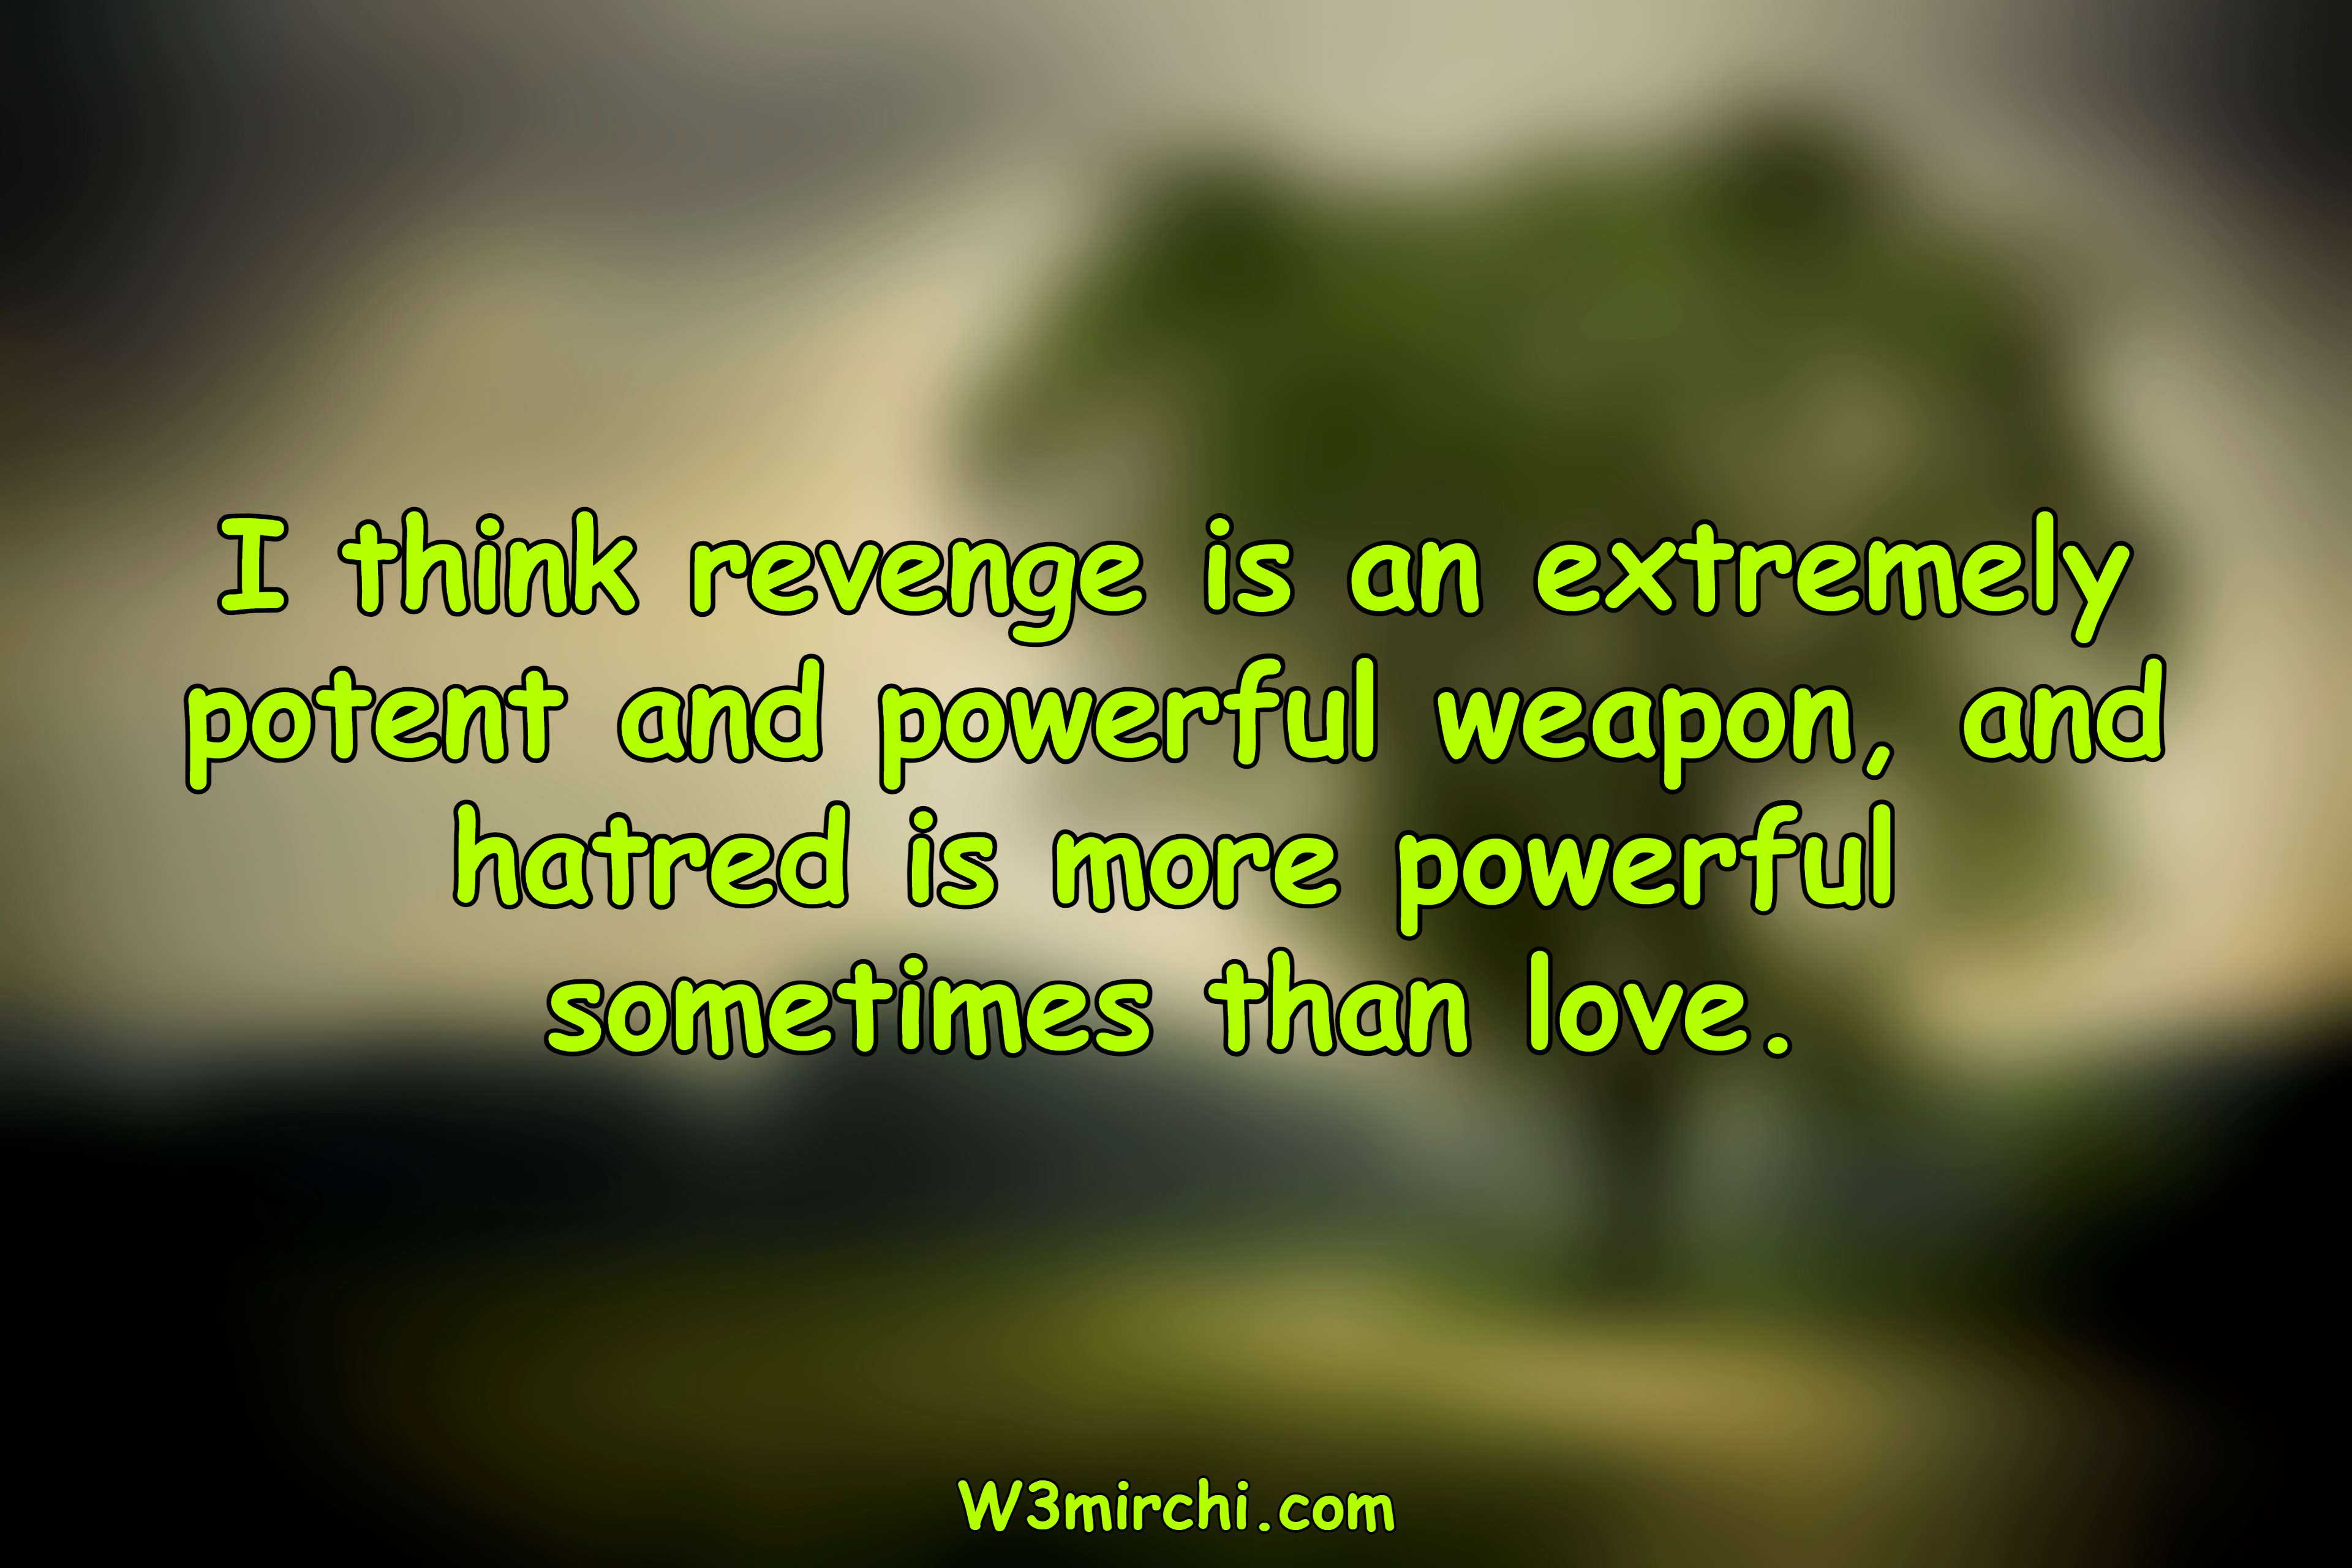 I think revenge is an extremely potent